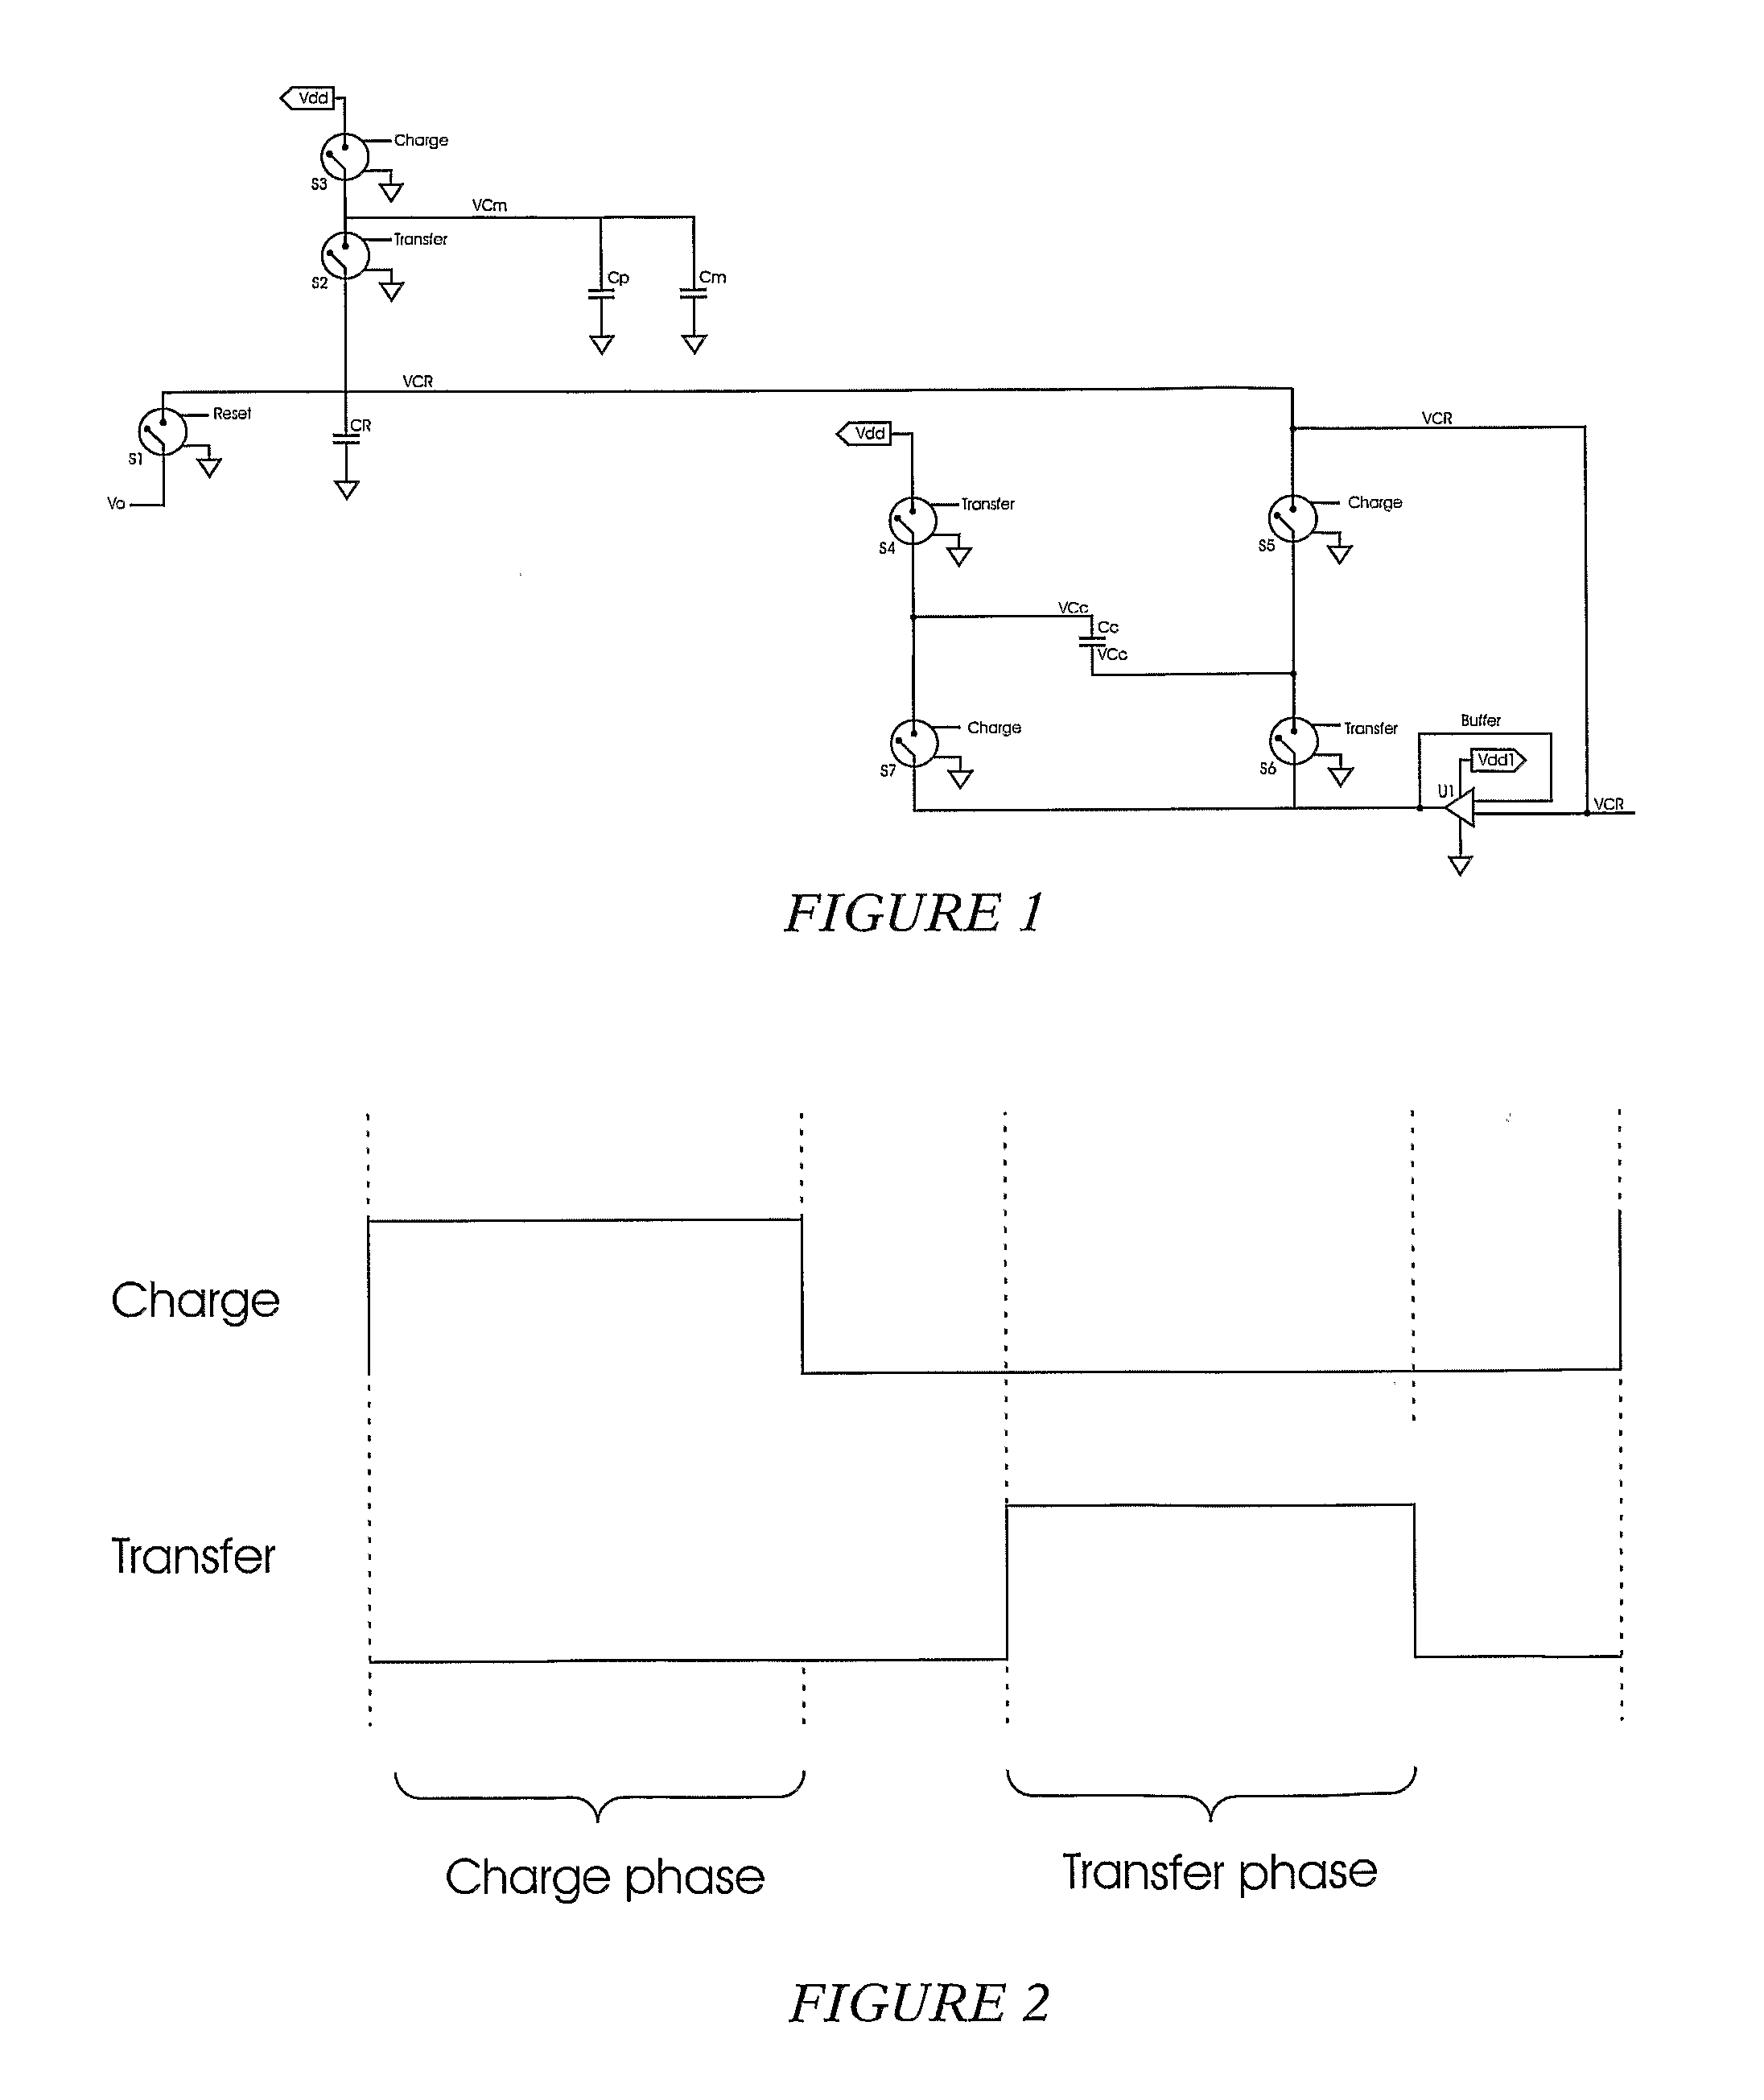 Parasitic capacitance cancellation in capacitive measurement applications